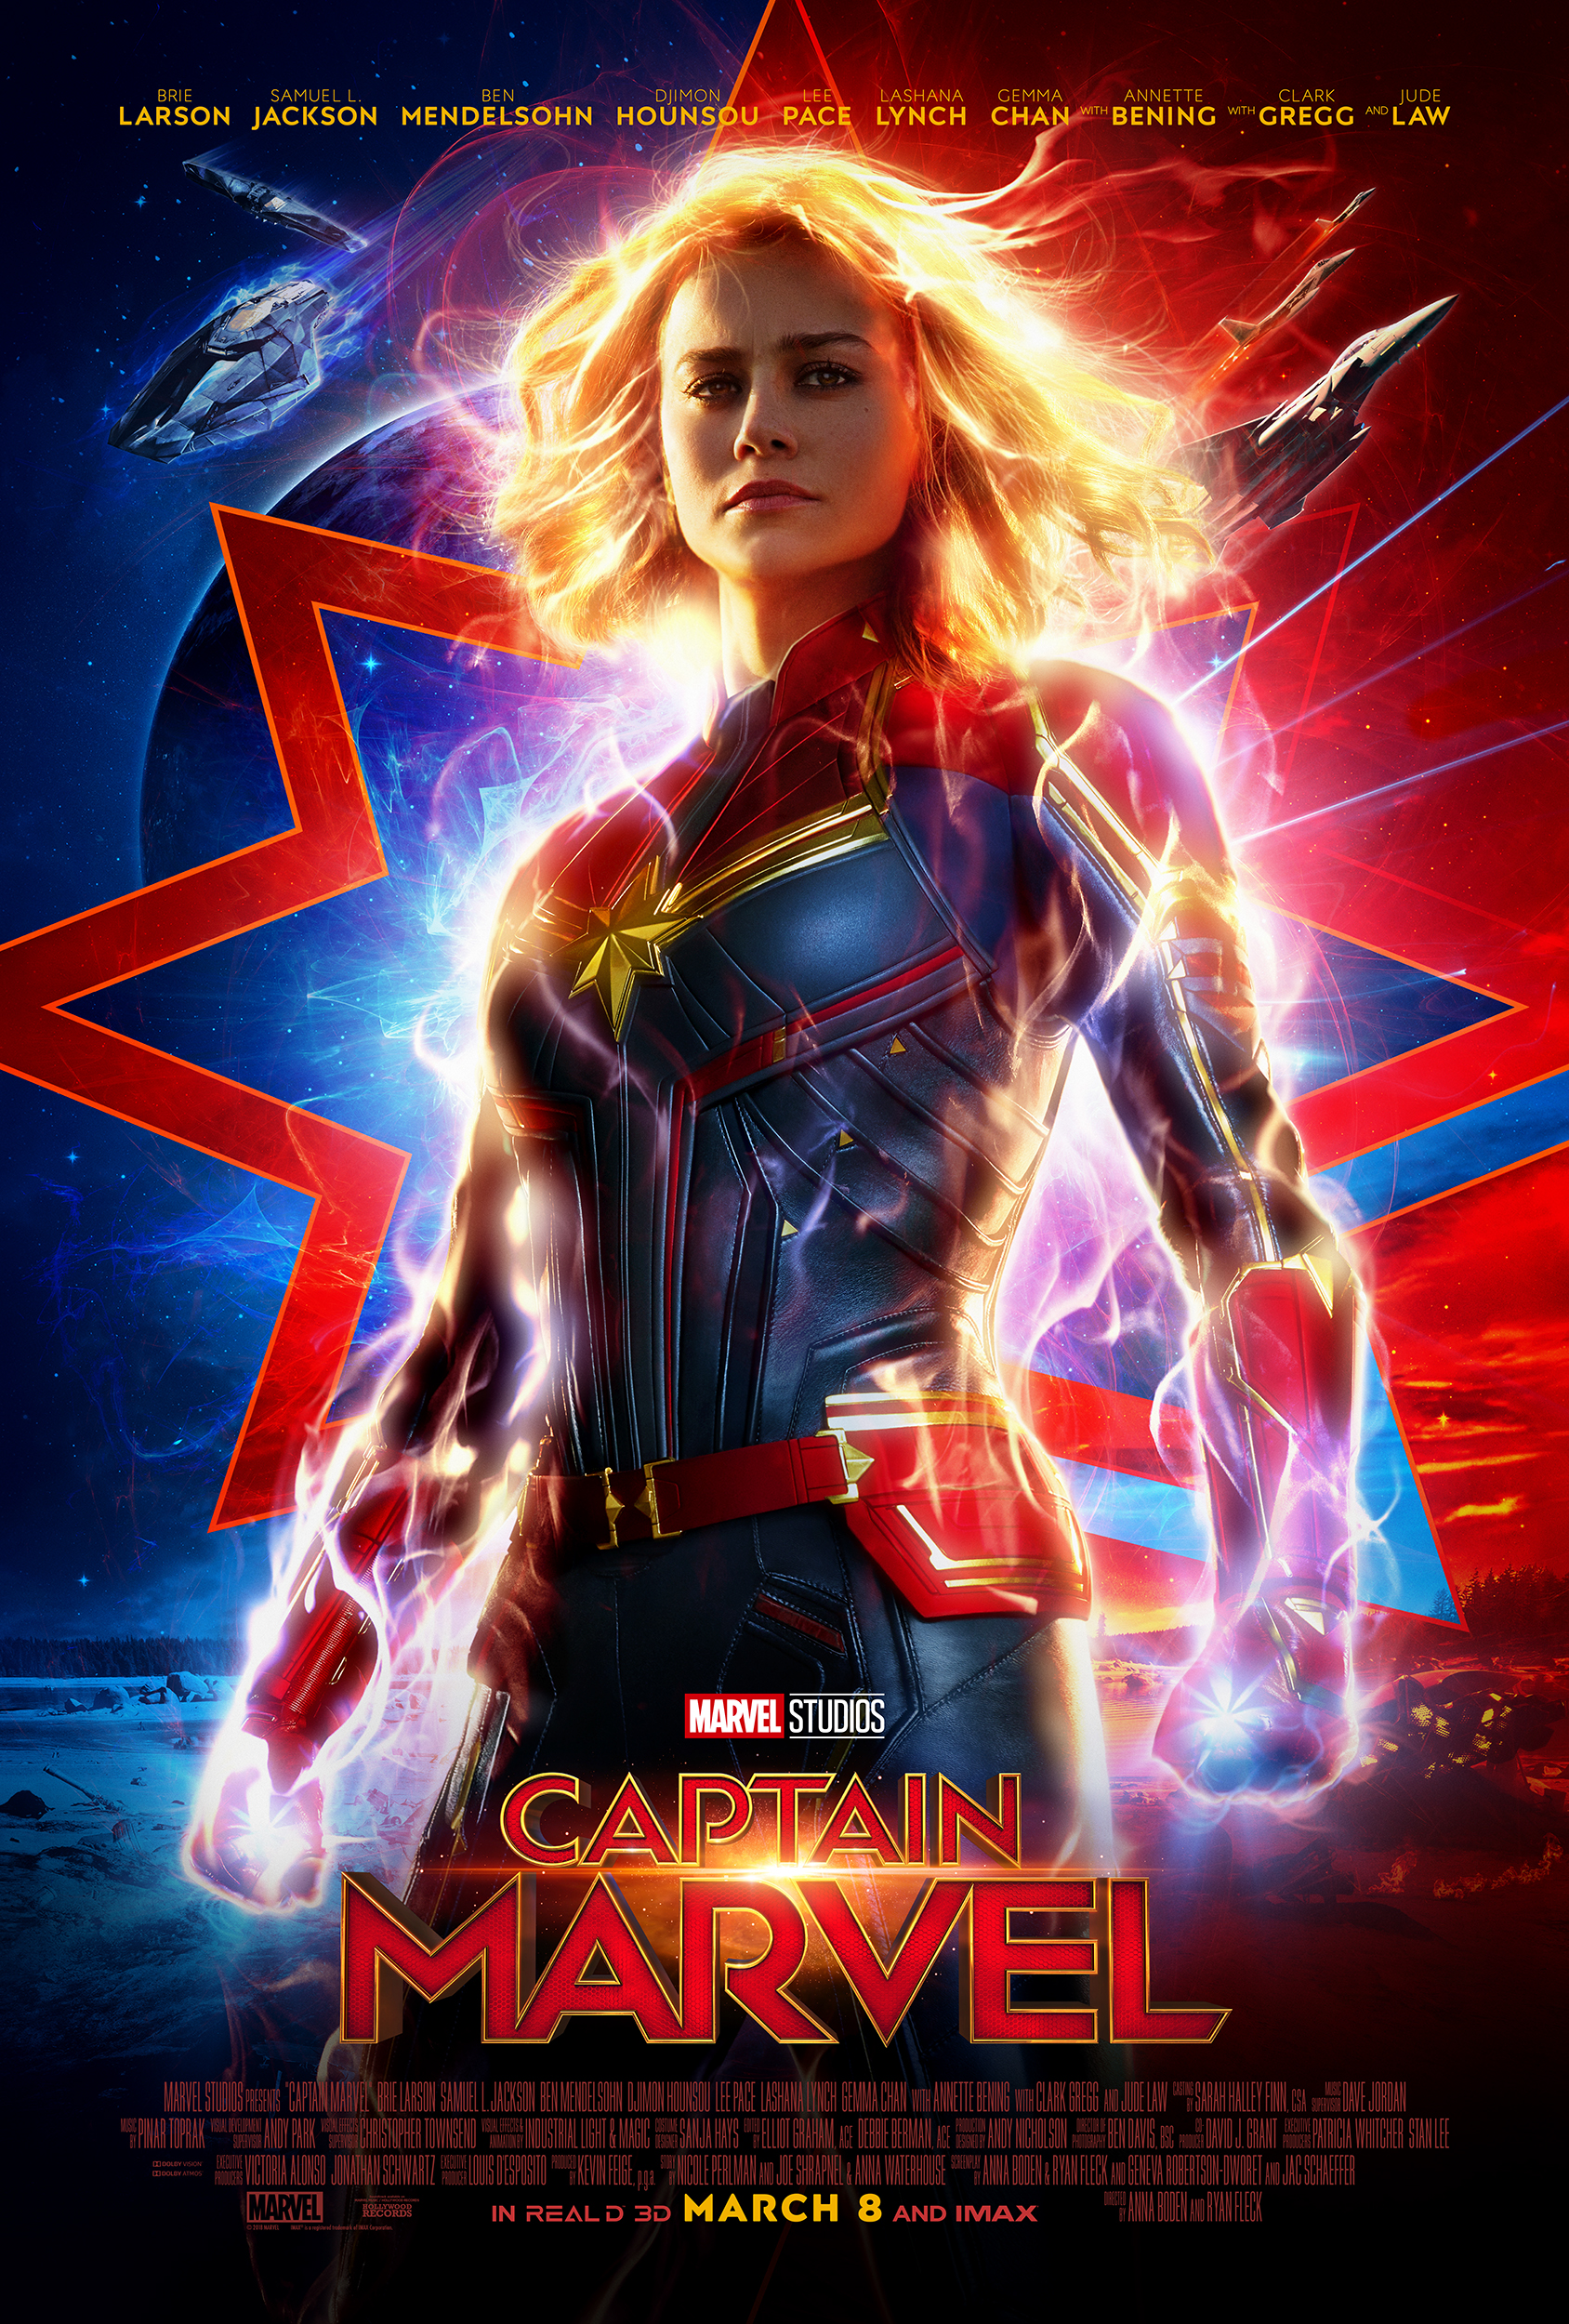 First Look at Marvel's CAPTAIN MARVEL Poster #CaptainMarvel #movie #marvel 